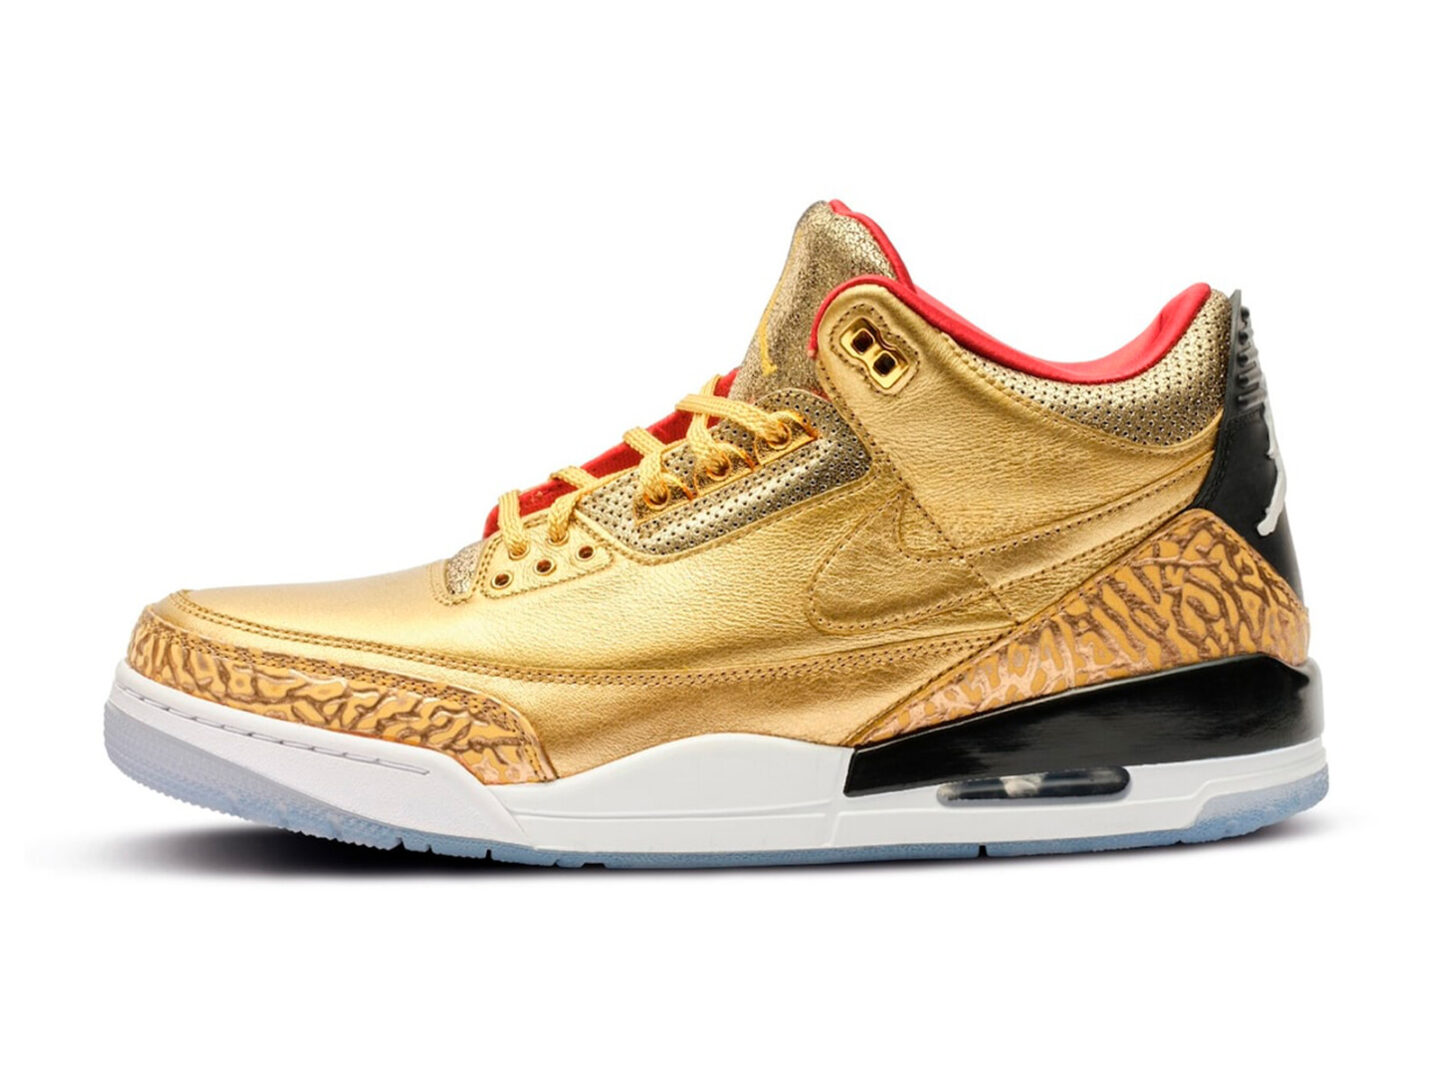 Spike Lee’s Air Jordan 3 “Gold Oscars” PEs to be auctioned at Sotheby’s